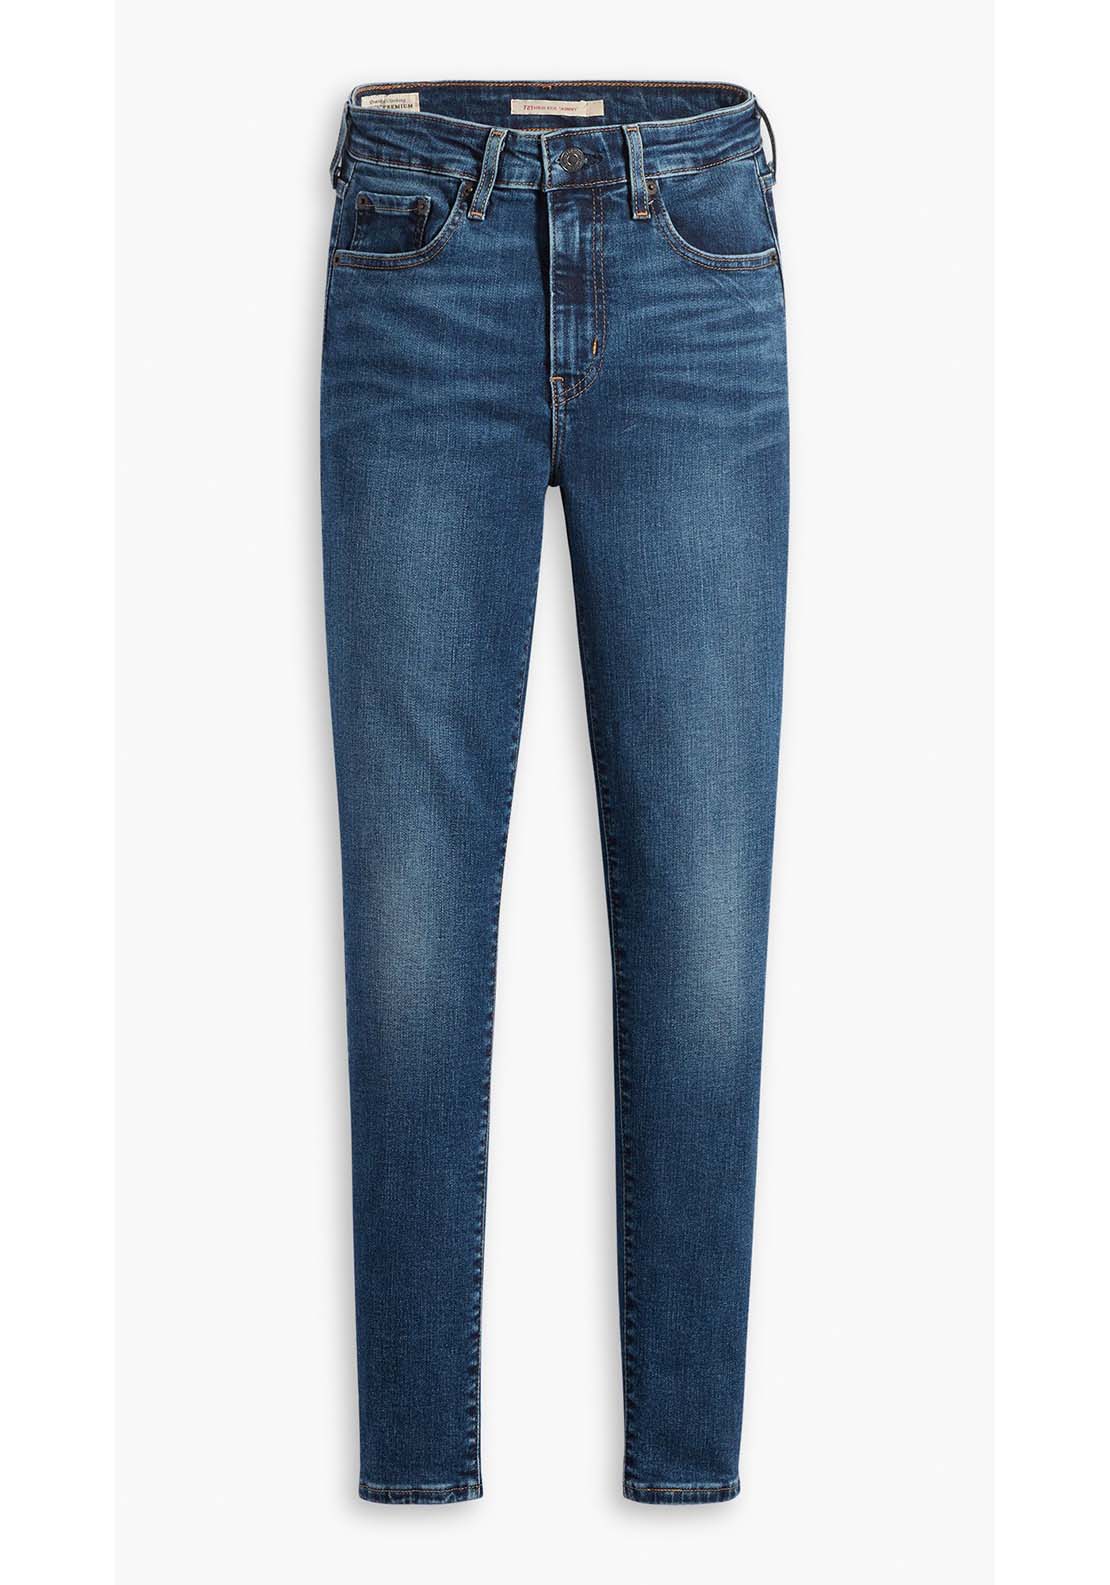 Levis 721 High Rise Skinny Jean 7 Shaws Department Stores